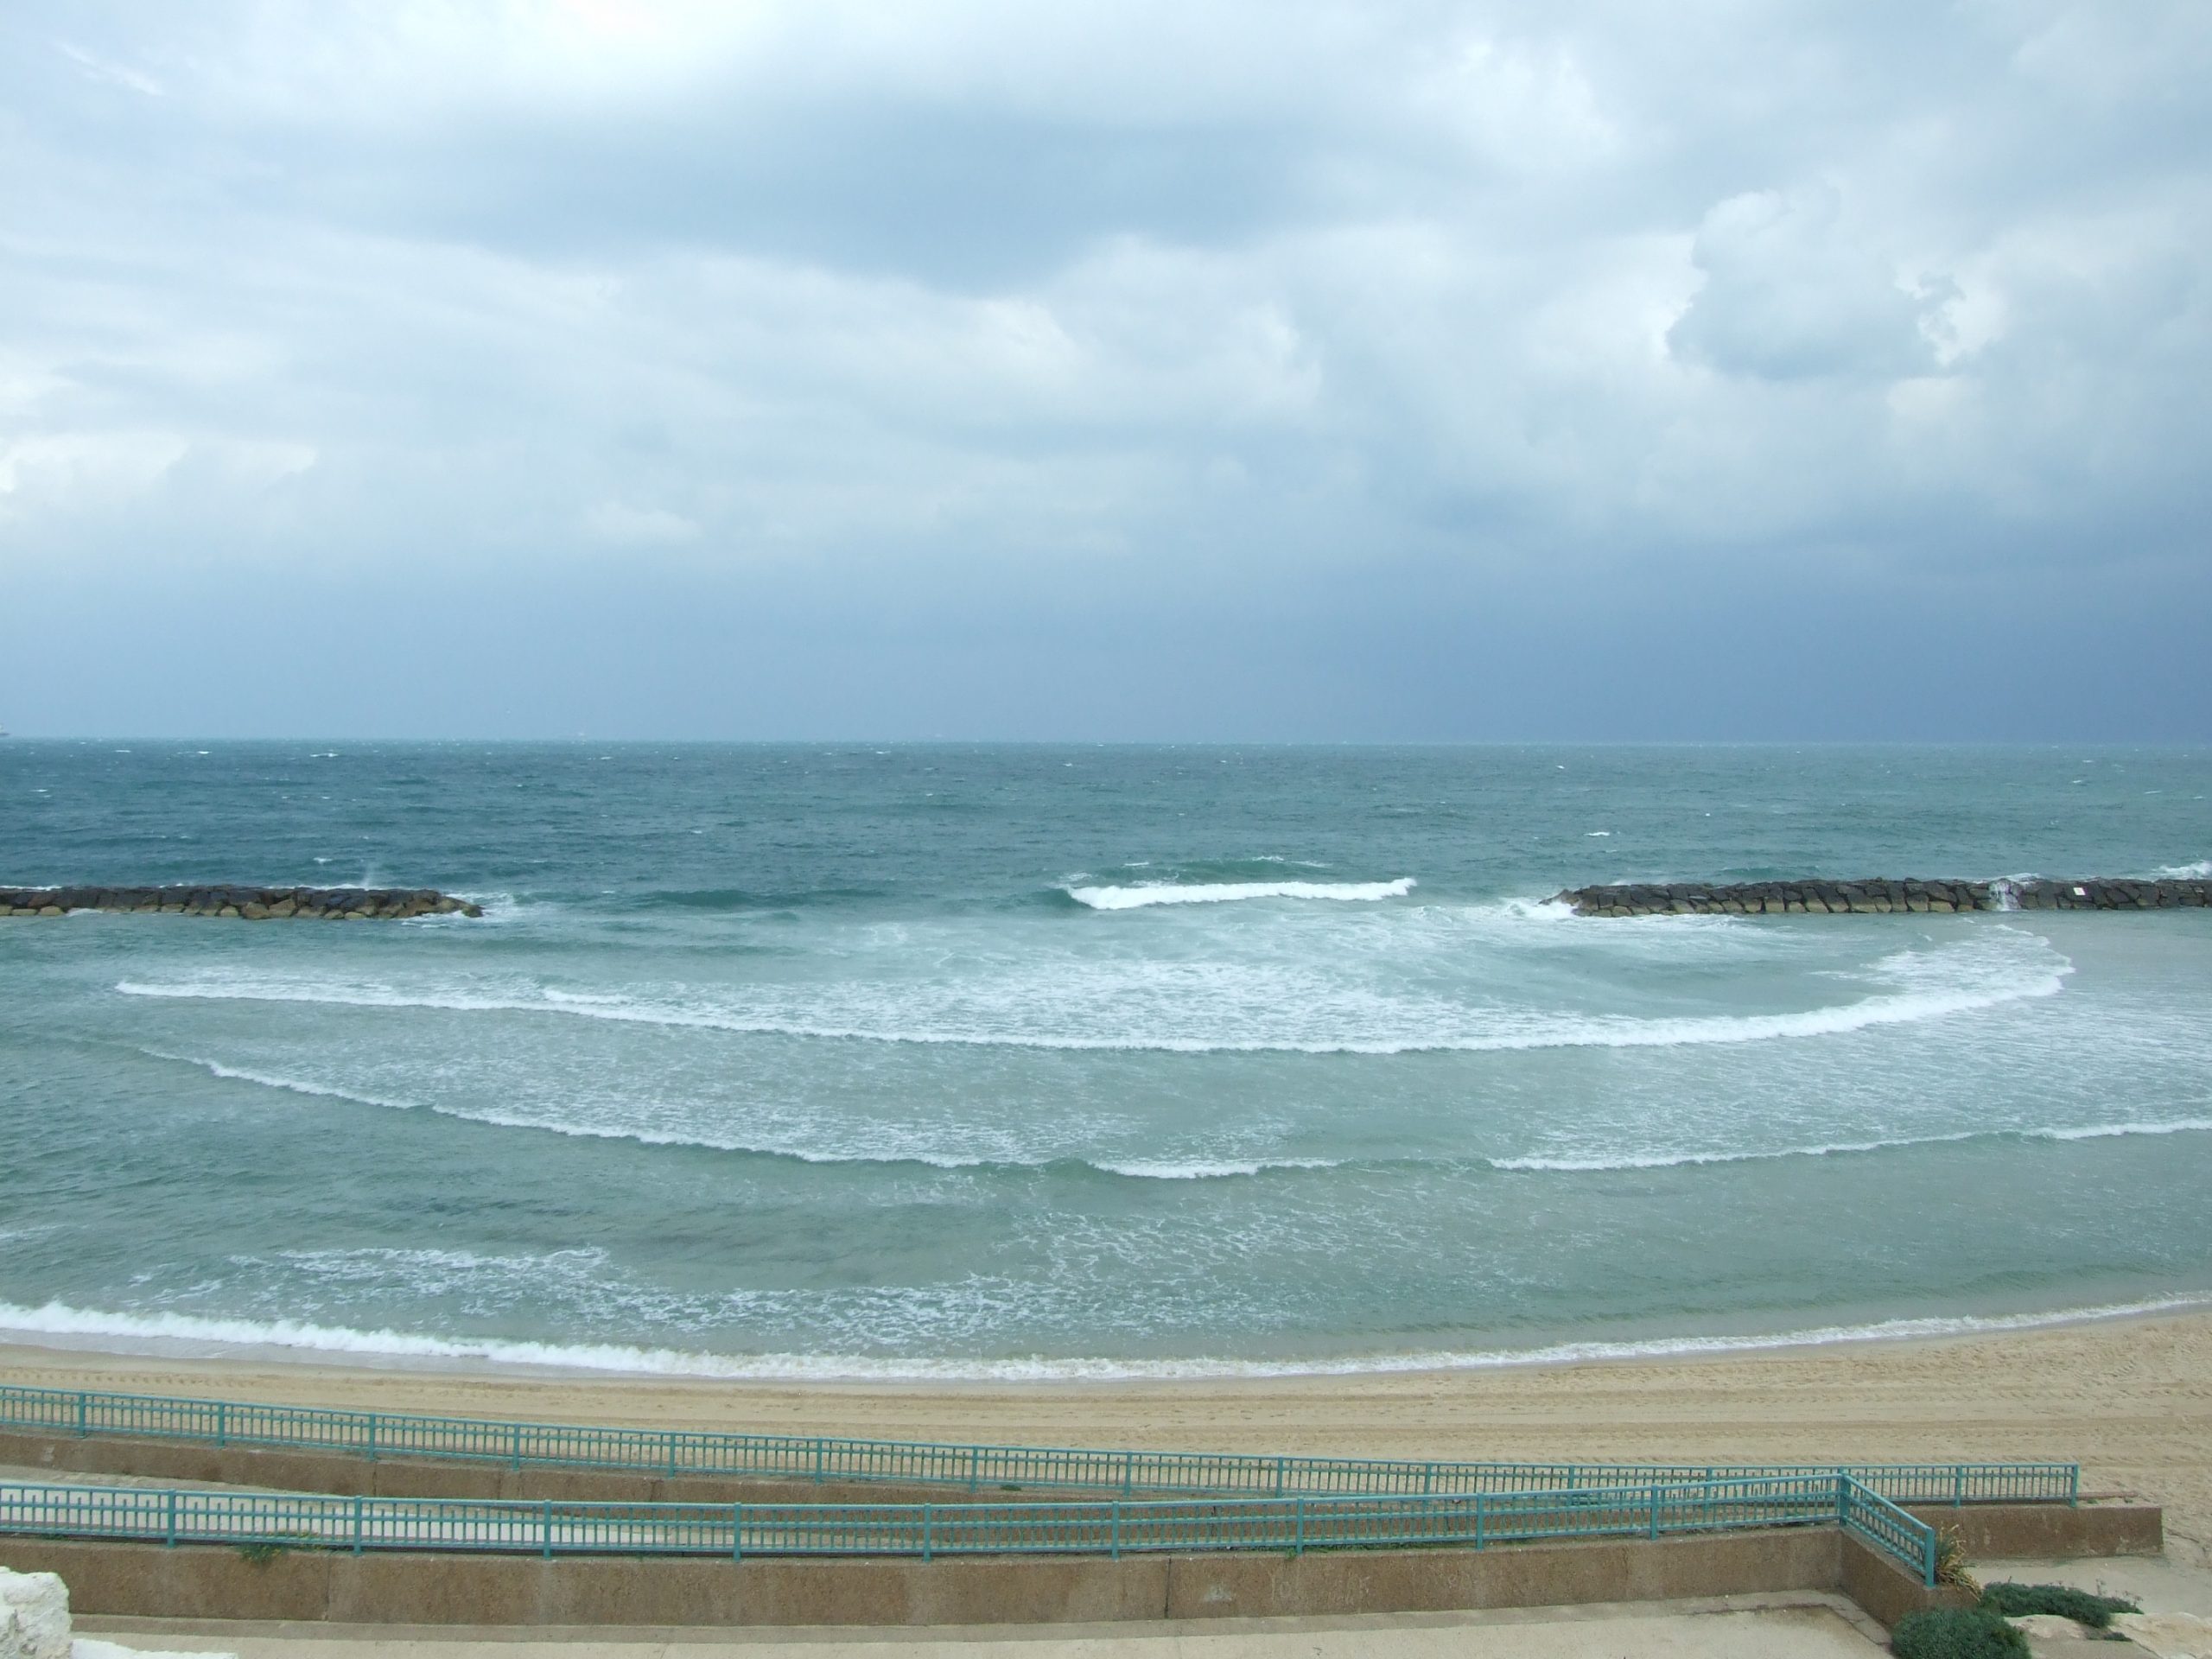 Waves approaching the beach from the ocean that pass through a breakwater form semicircular waves.